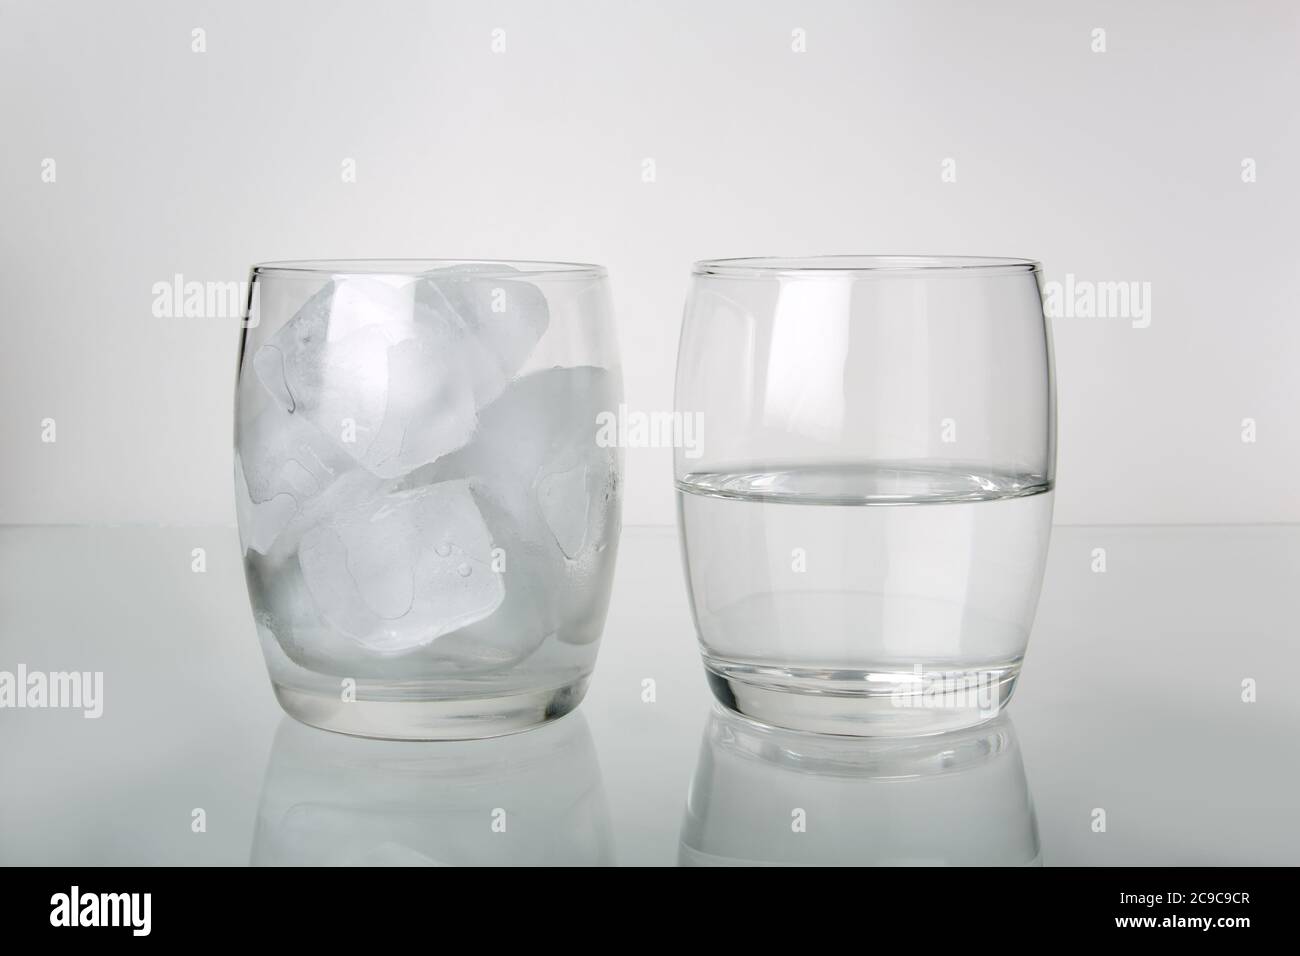 Photograph of two glasses. One glass full of ice with a second glass half full of water to show ice melted. Photographed on a light background. Stock Photo